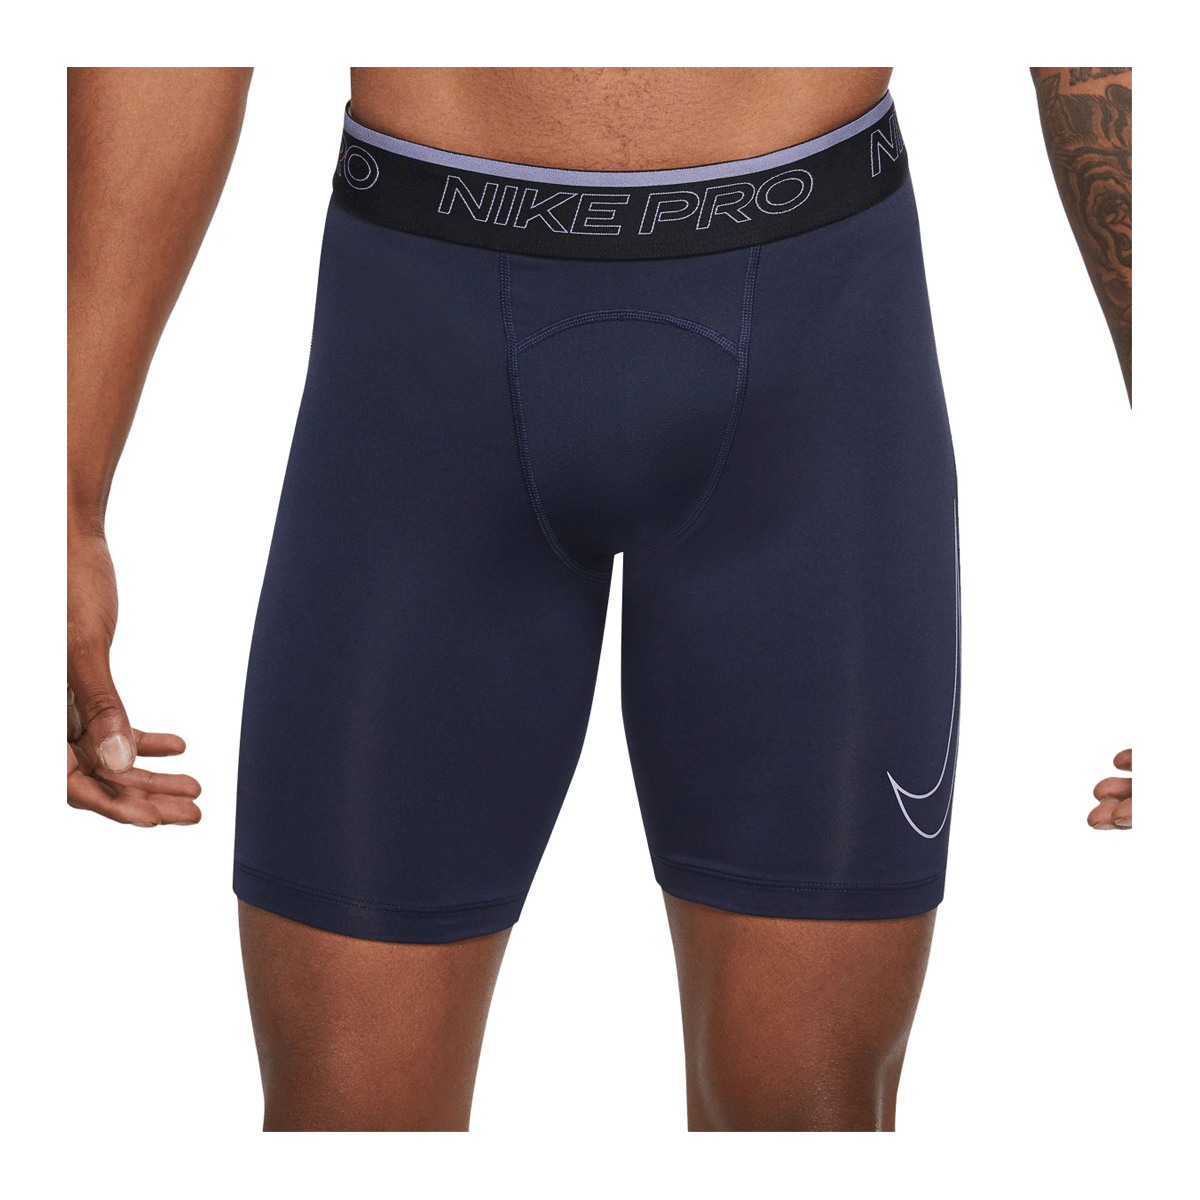 nike pro combat compression shorts with cup pocket - OFF-66% >Free